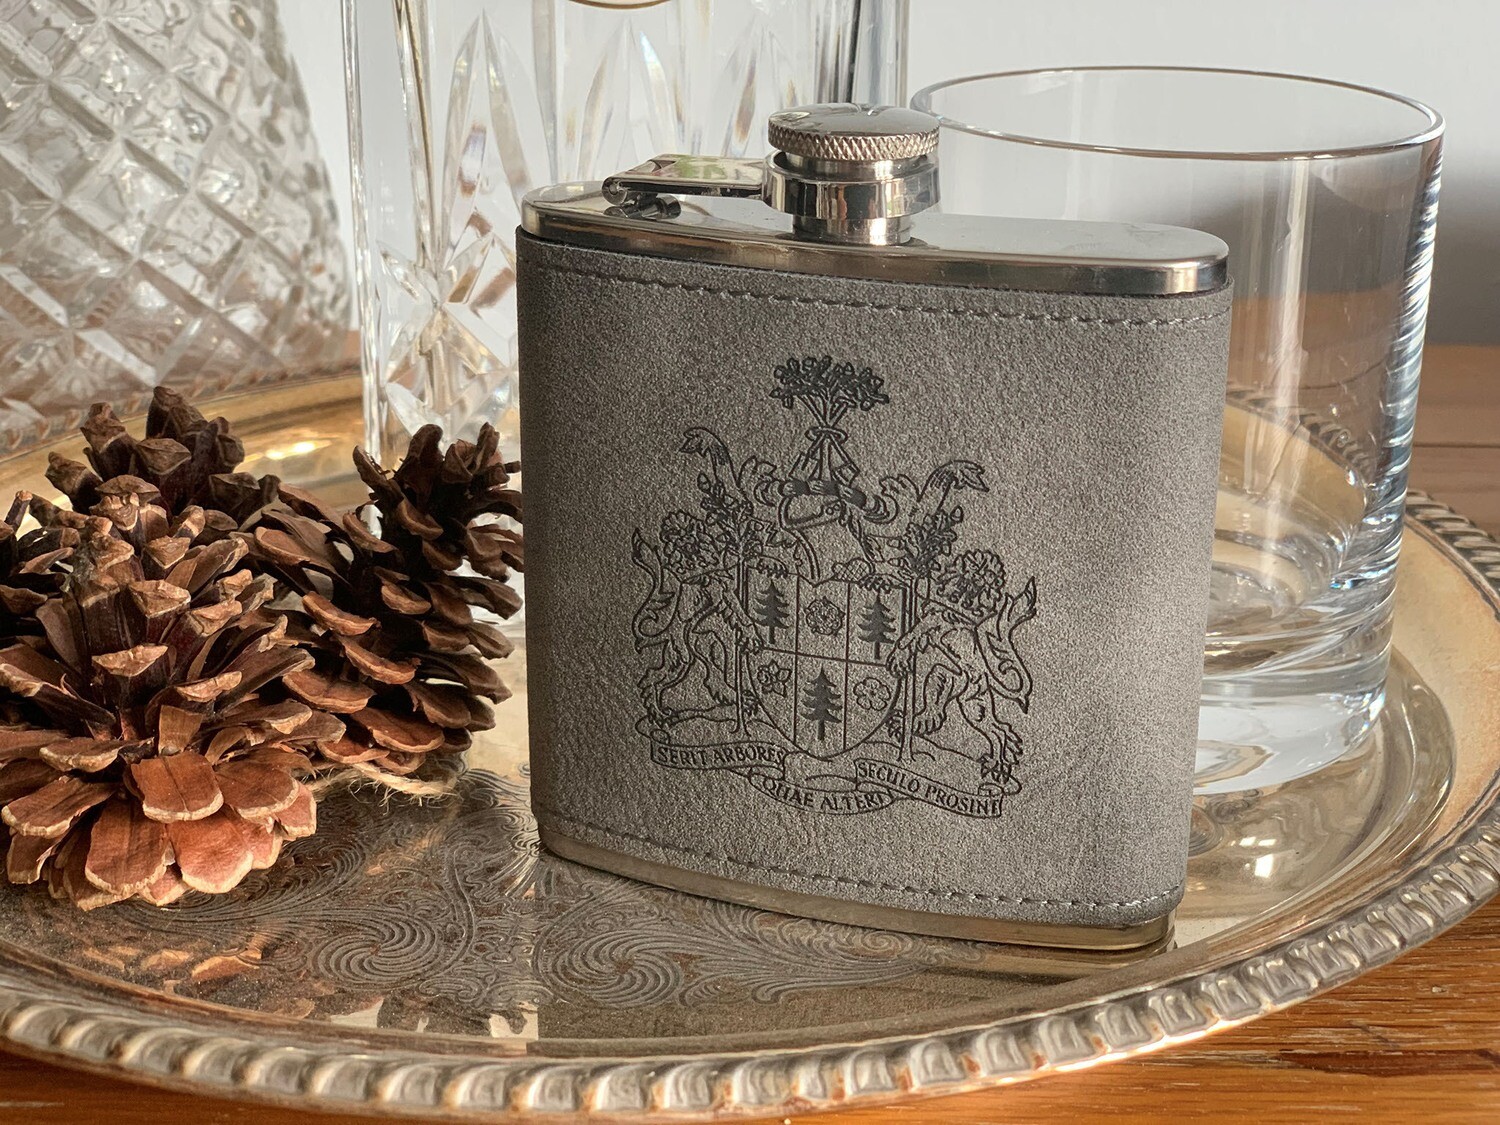 Hip Flask with RFS Coat of Arms